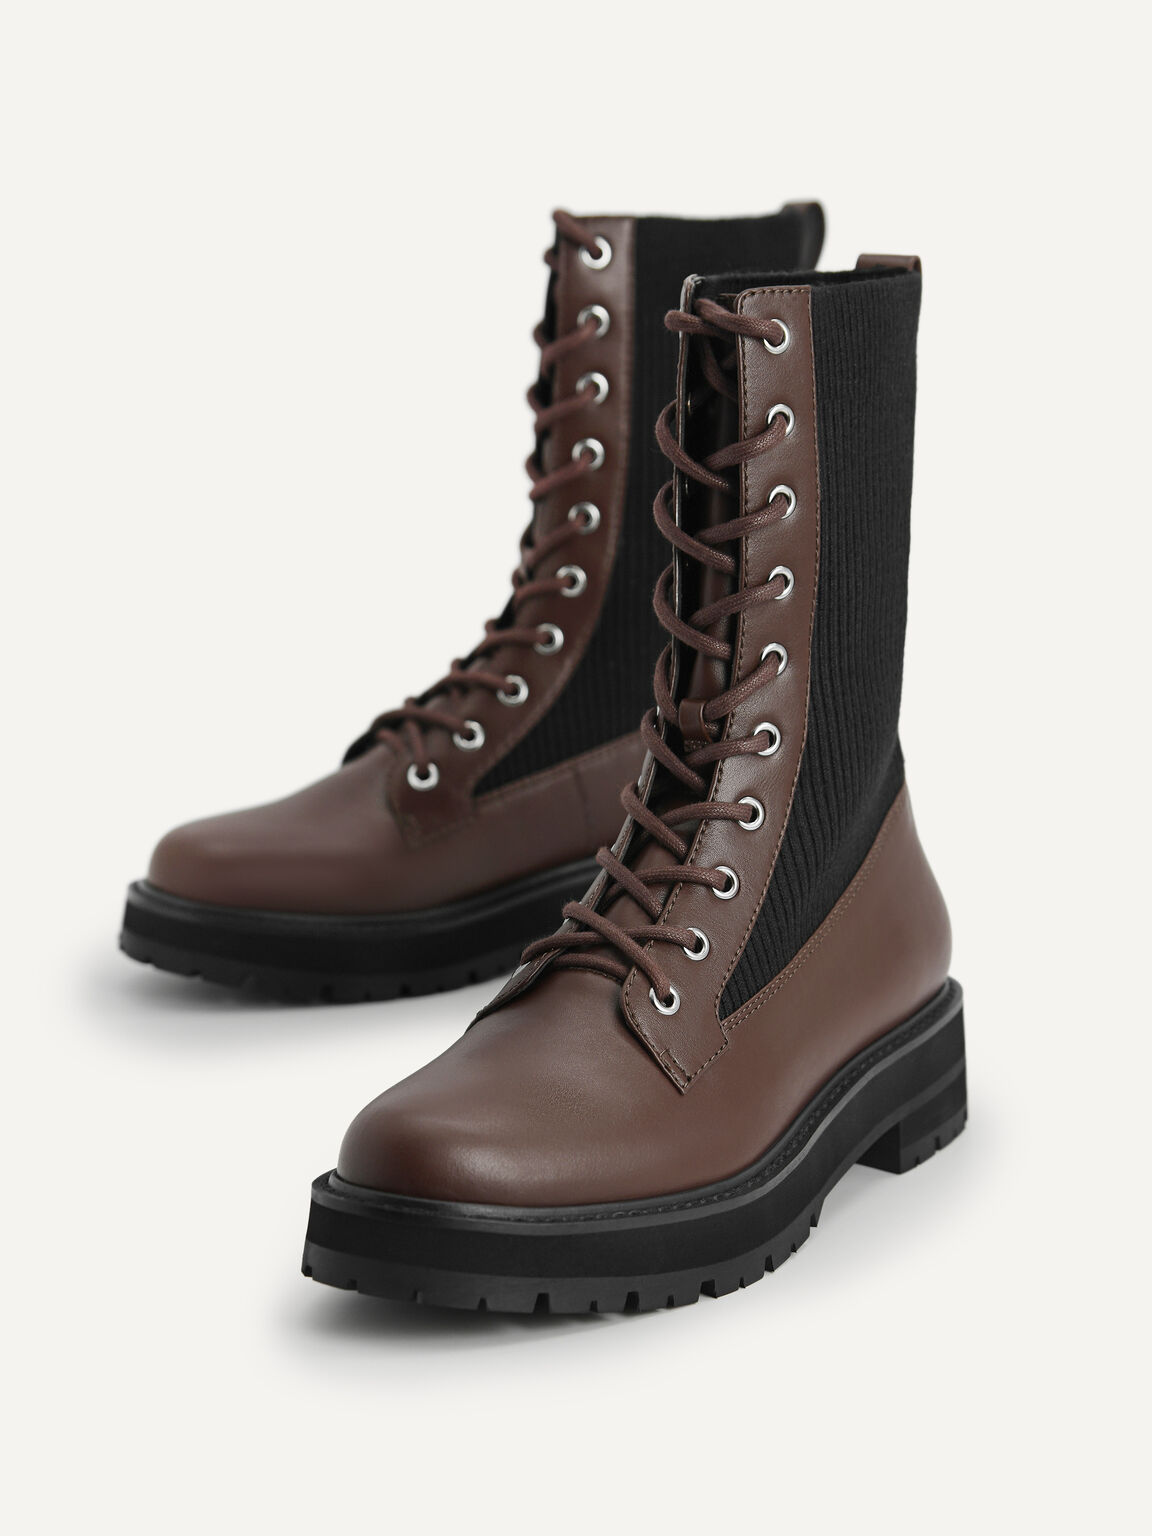 Chunky Lace-up Boots, Dark Brown, hi-res